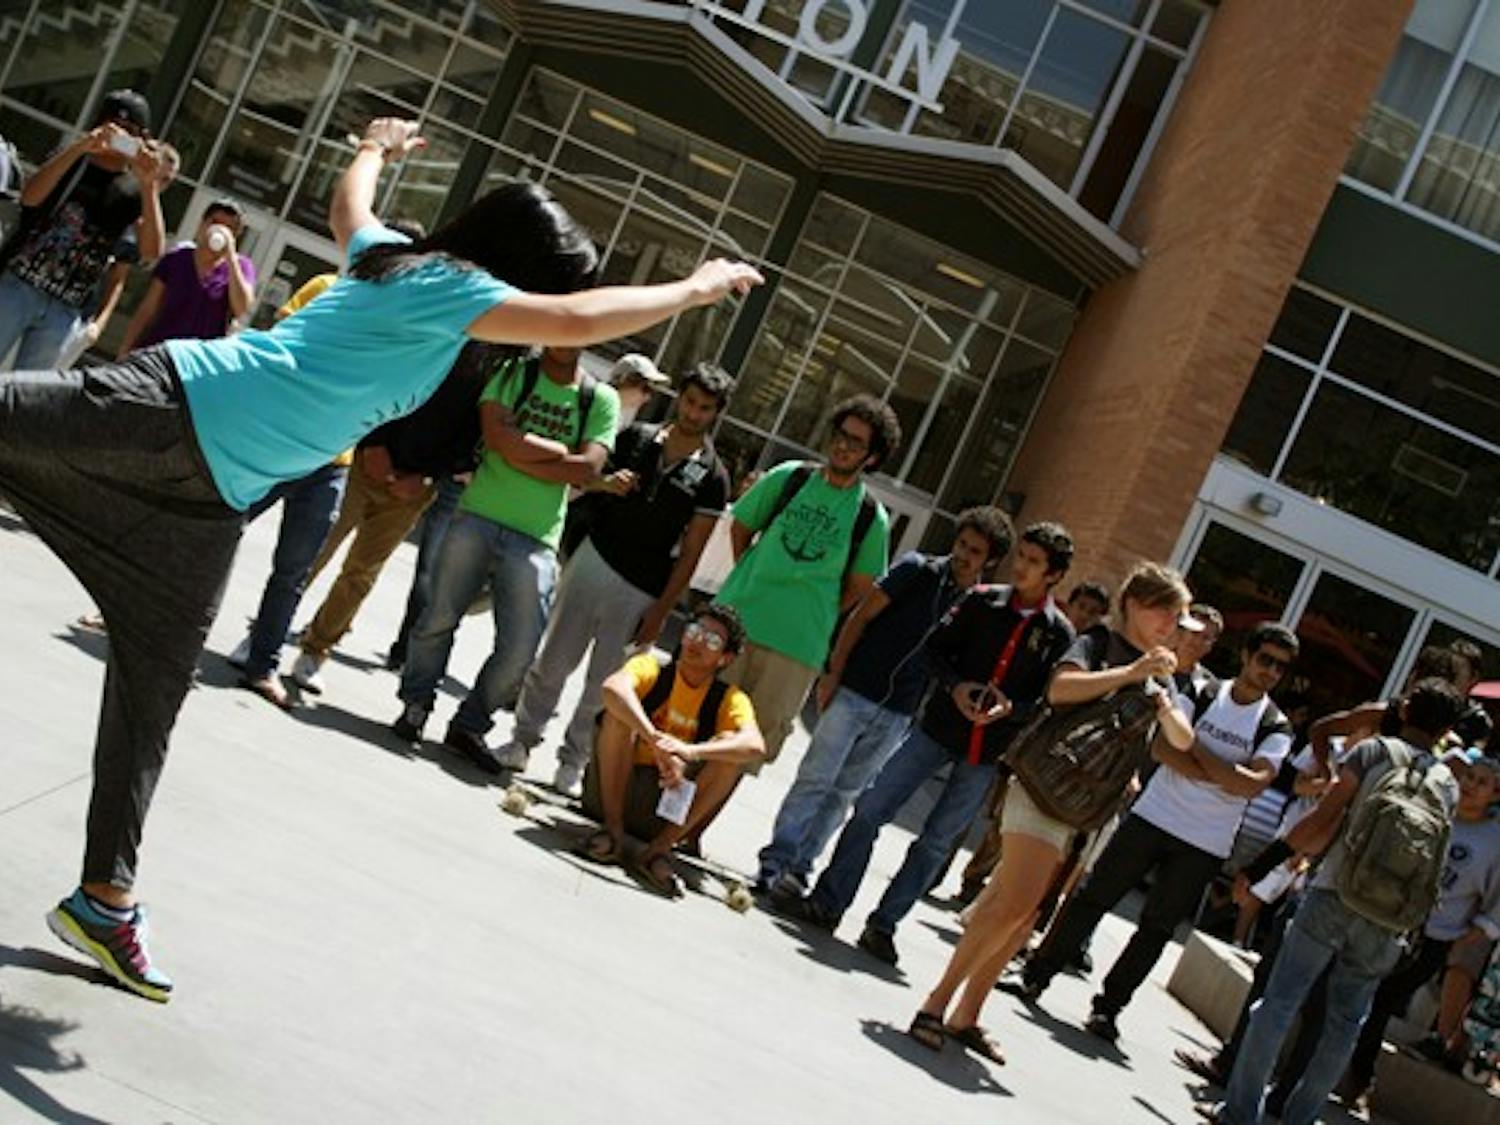 Students of the ASU dance program advertised for an event called Urban Soul, which incorporates the four elements of hip-hop, and will be held in downtown Phoenix on Saturday. (Photo by Jessie Wardarski)